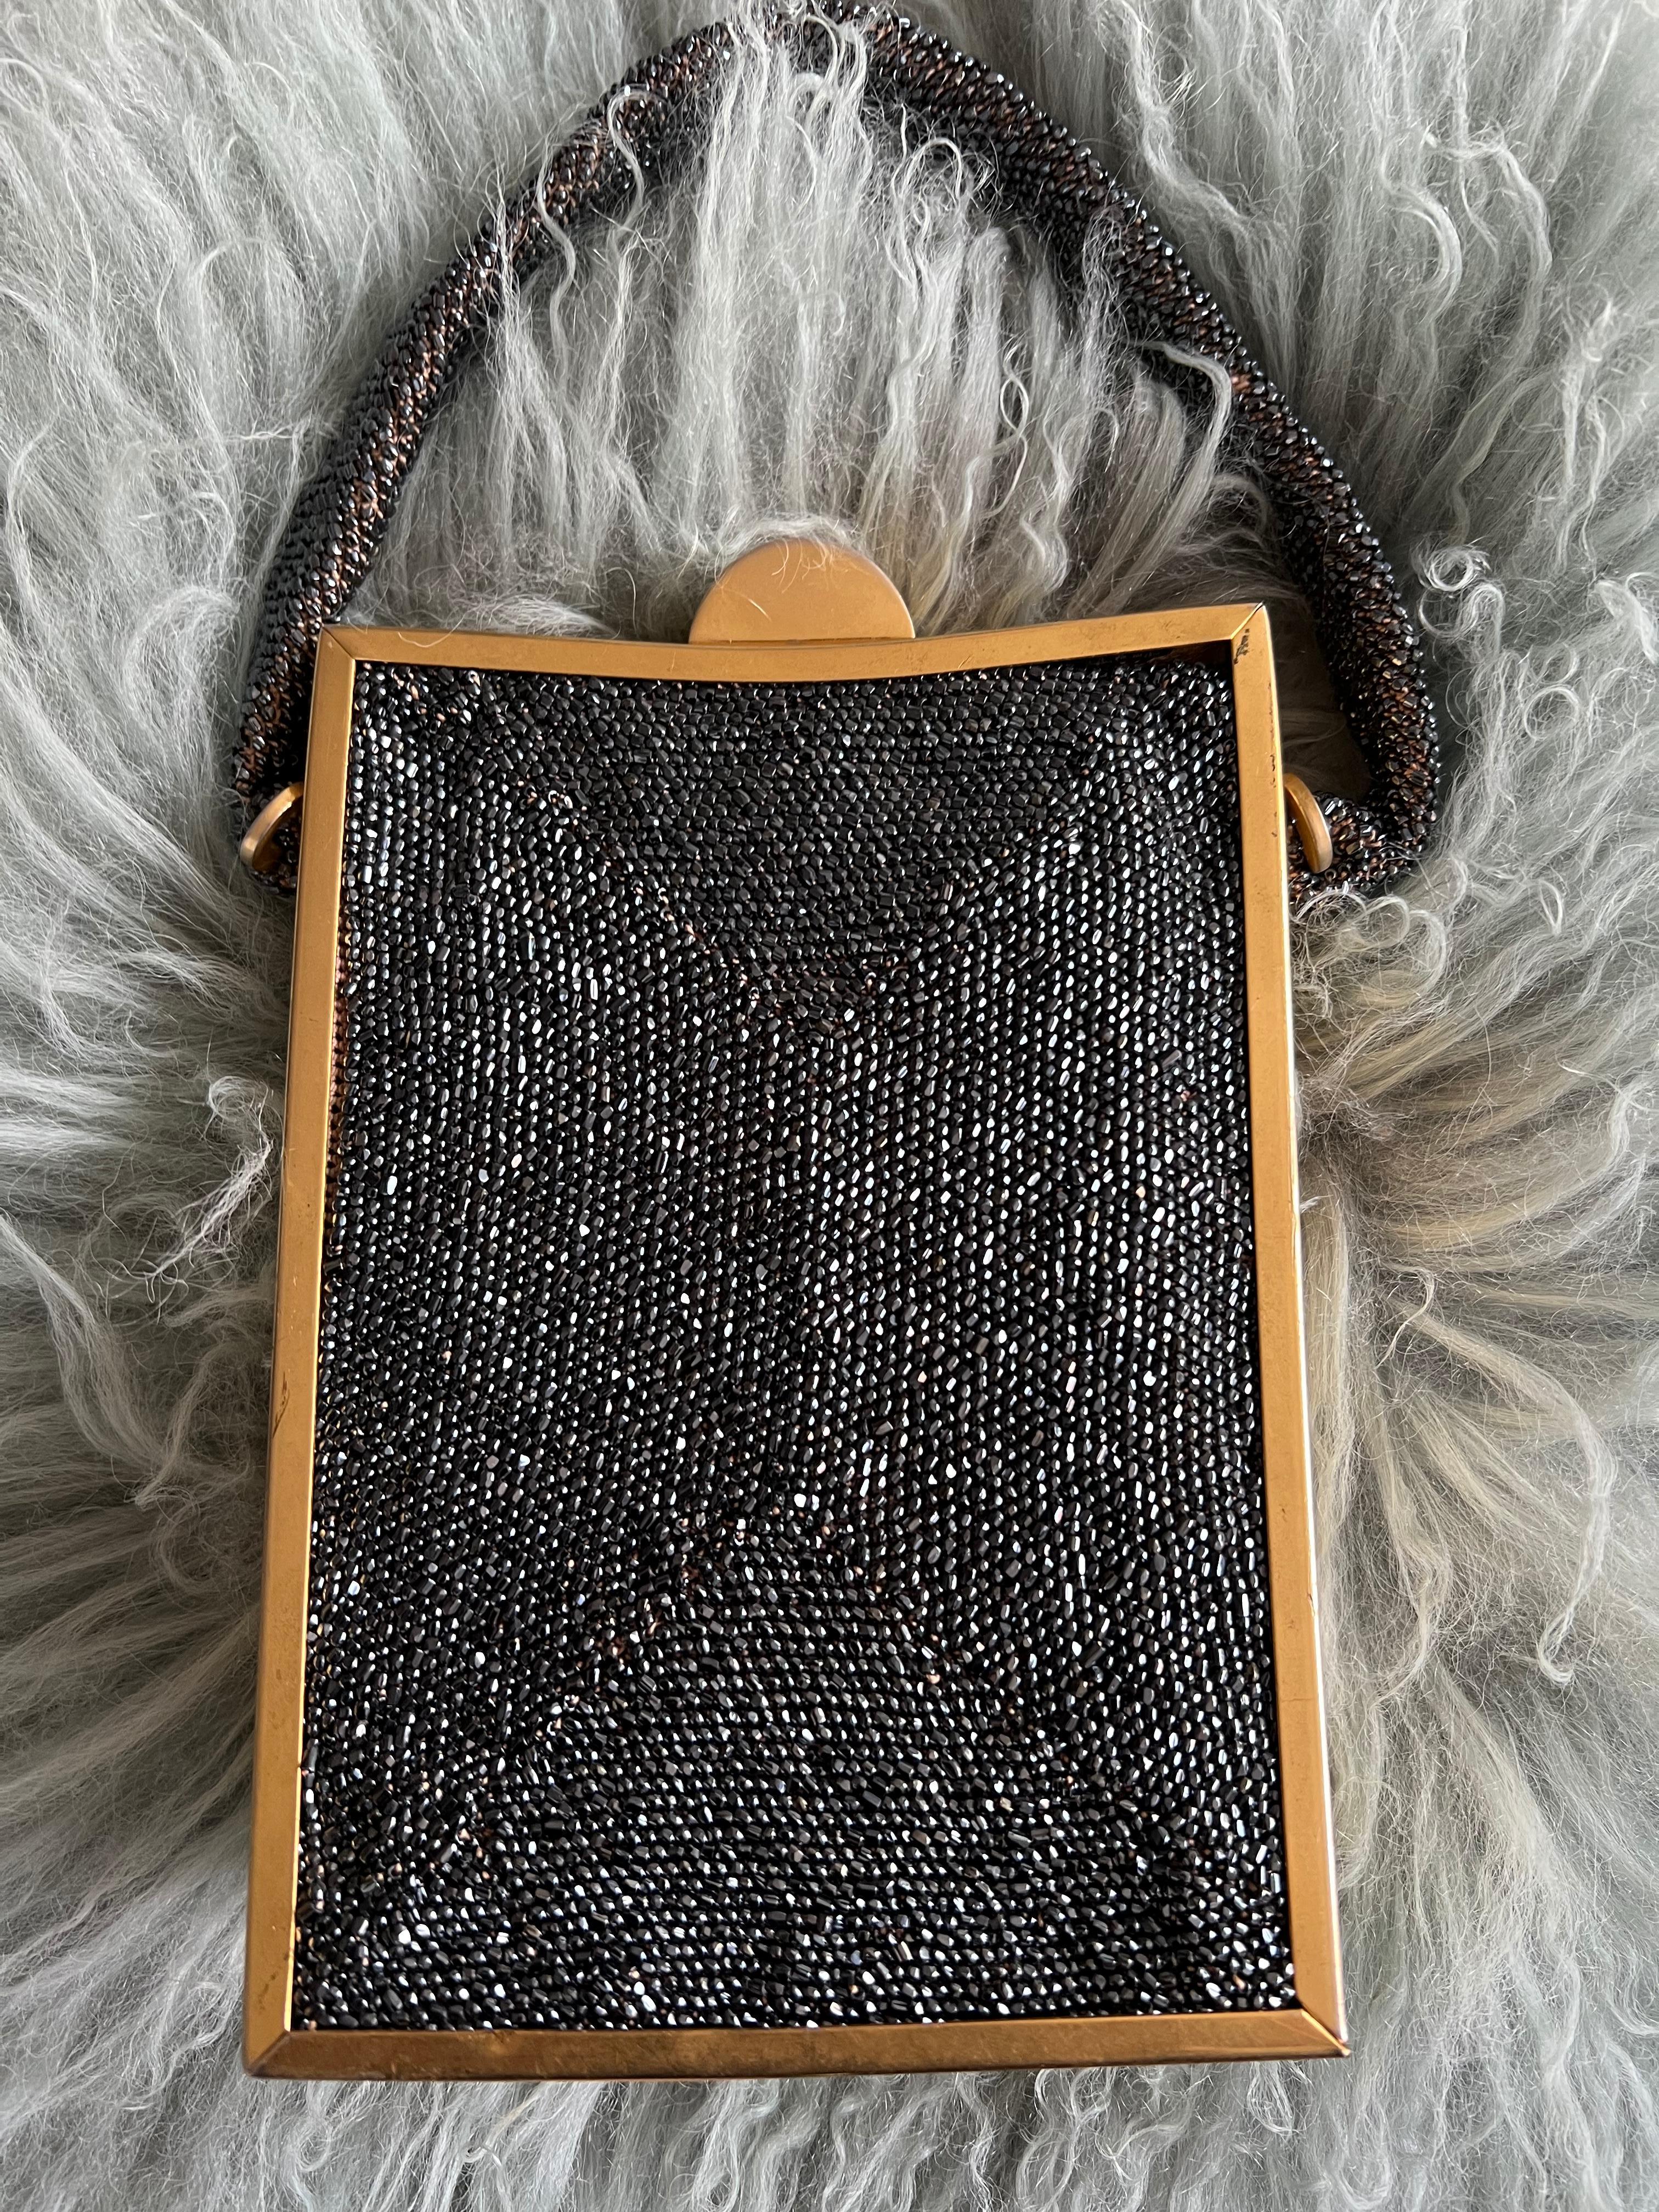 A rare vintage Art Deco evening bag made in British Hong Kong.
Circa 1950.
In excellent condition.
Own a piece of history 
Stylish and Chic this evening bag is all the rage. 
